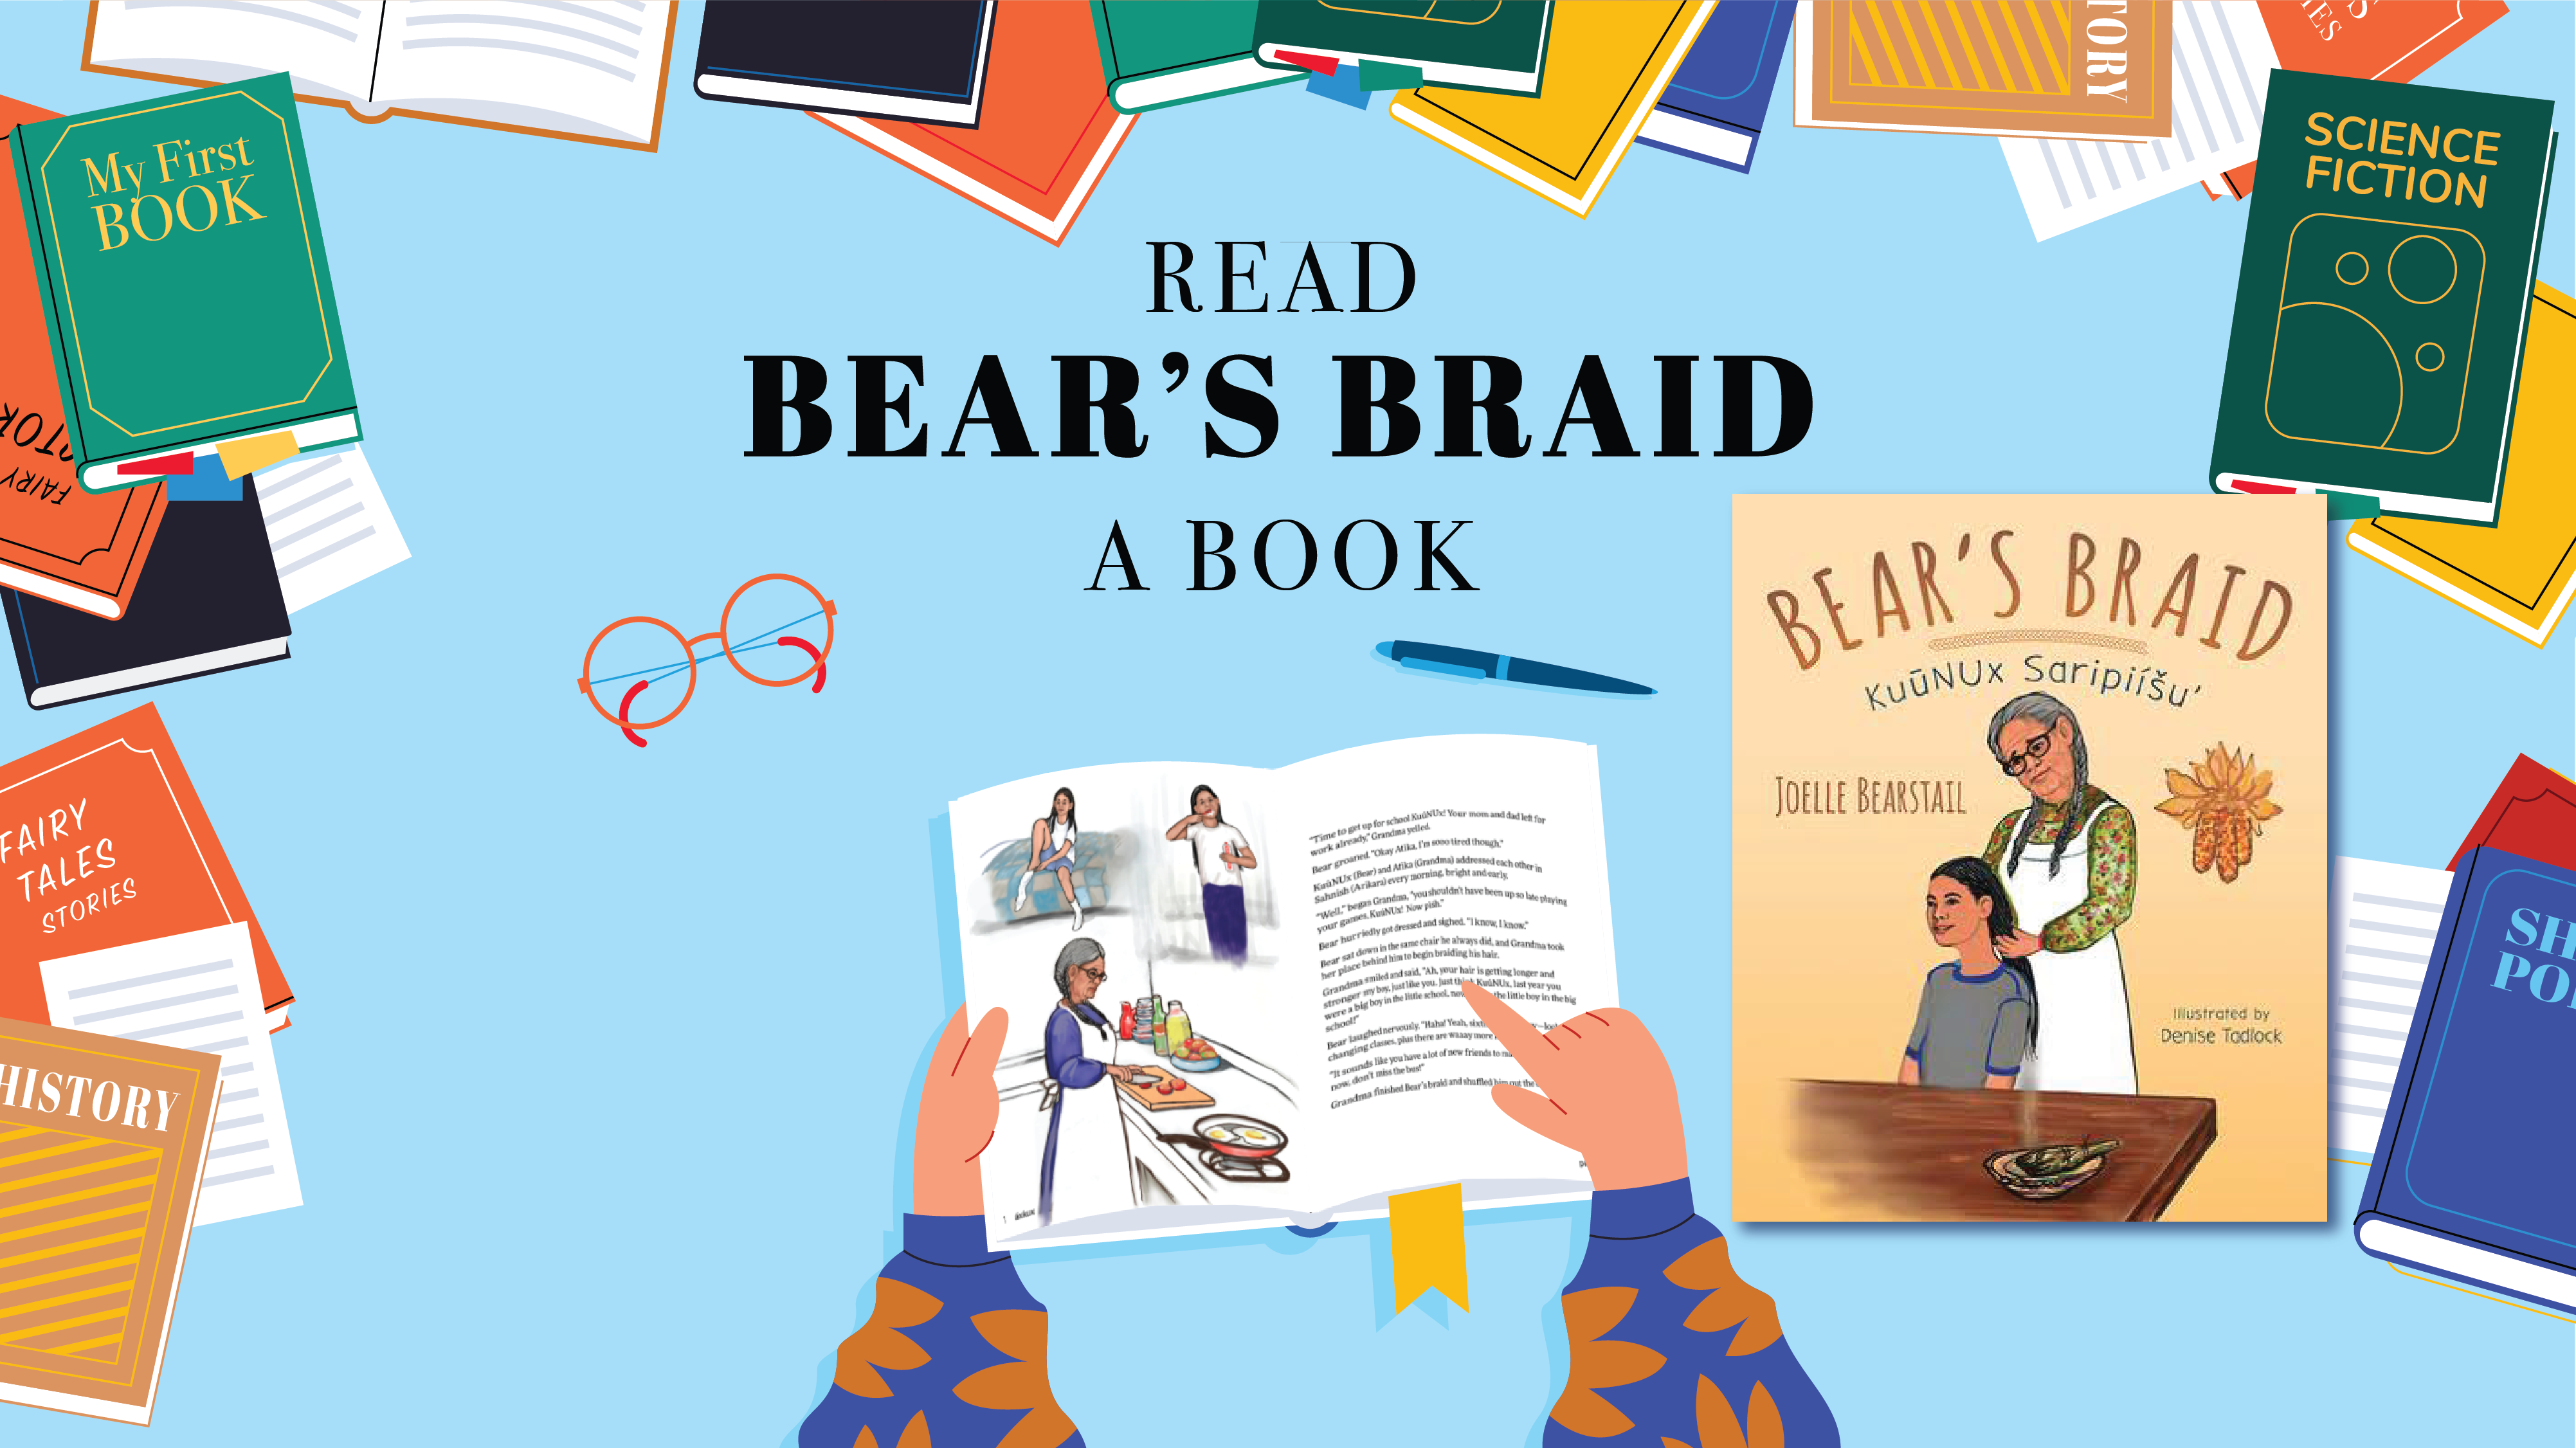 Books border, headline- first line: READ second line: "Bear's Braid" third line: A BOOK graphics of orange glasses, blue pen, a person opening a book and point at the two spread pages from "Bear's Braid". The cover of "Bear's Braid" on right side.